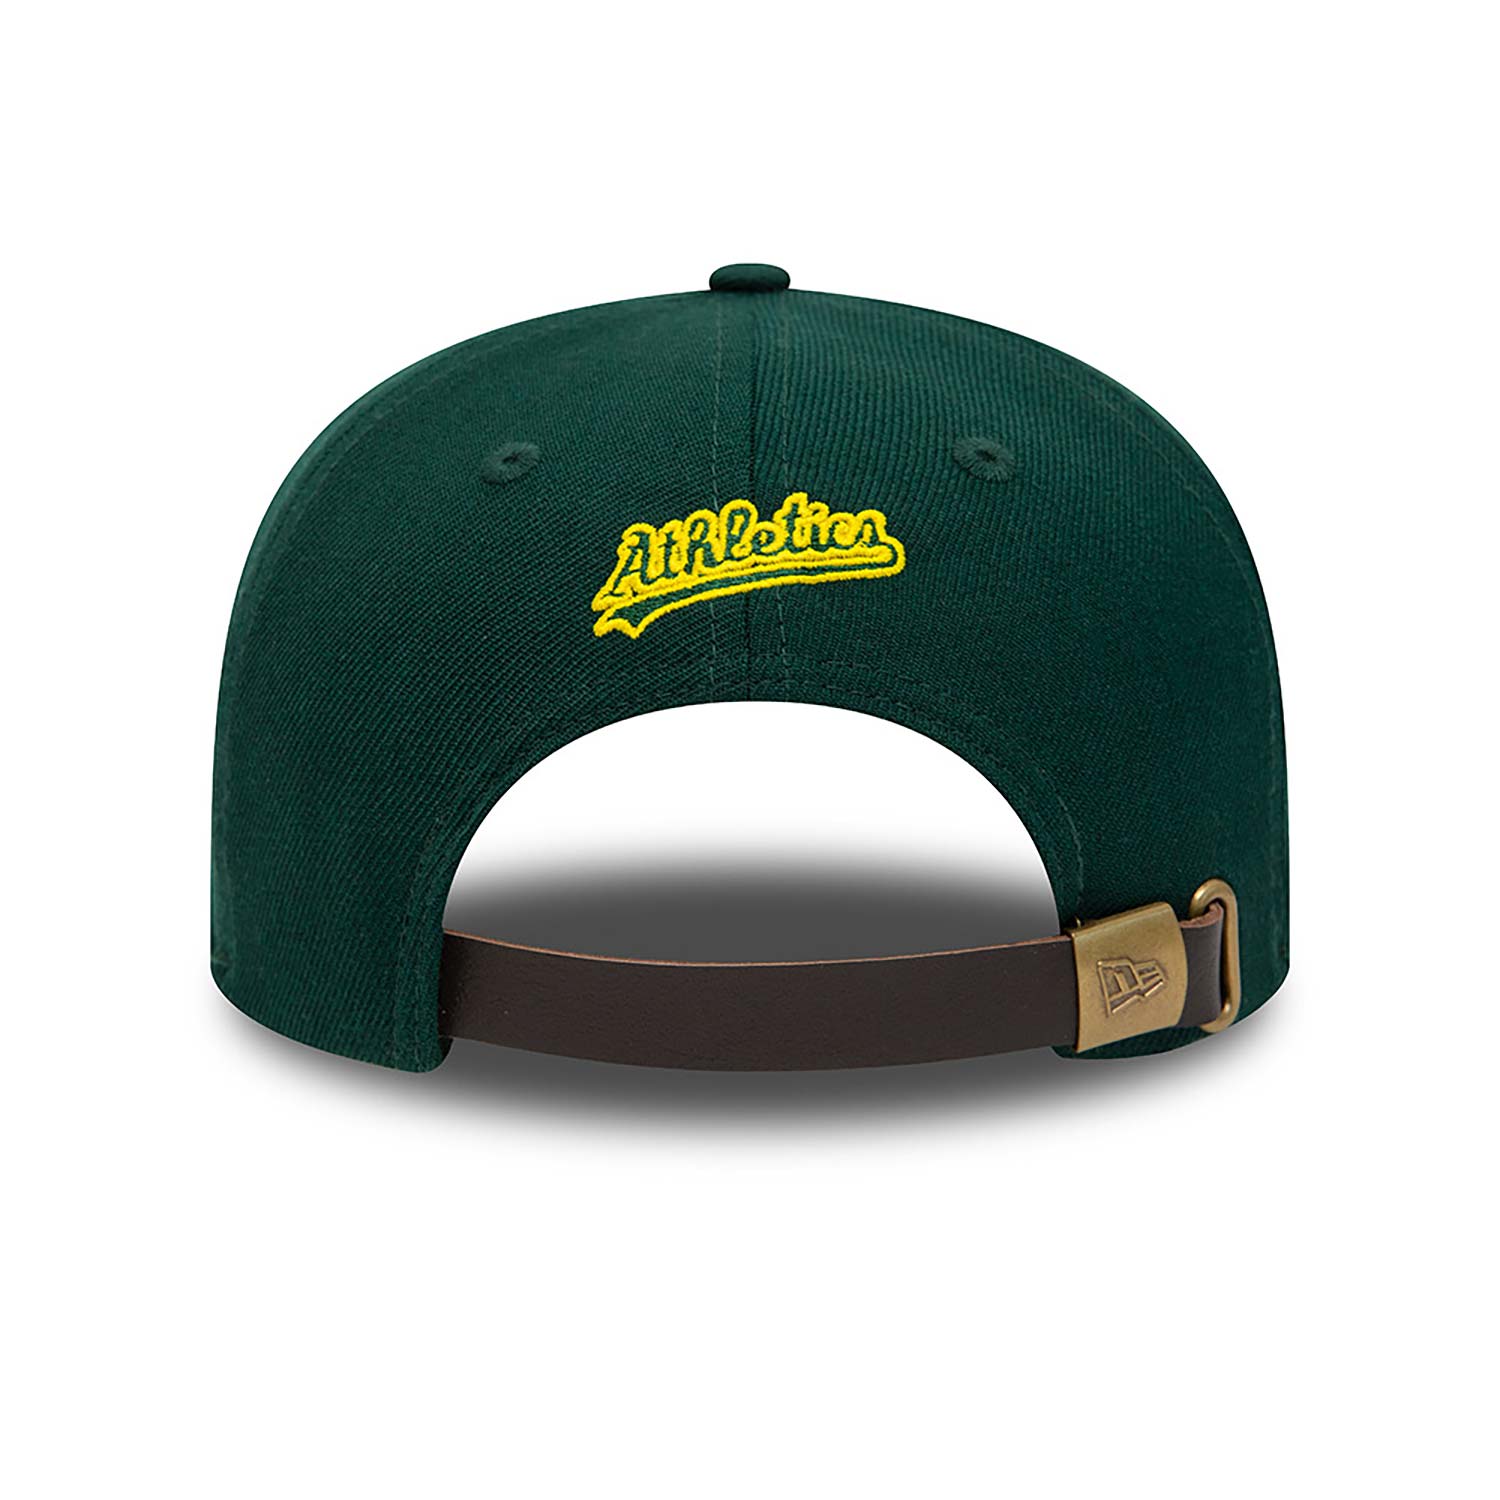 Oakland Athletics Cooperstown Multi Patch Green 9FIFTY Snapback Cap